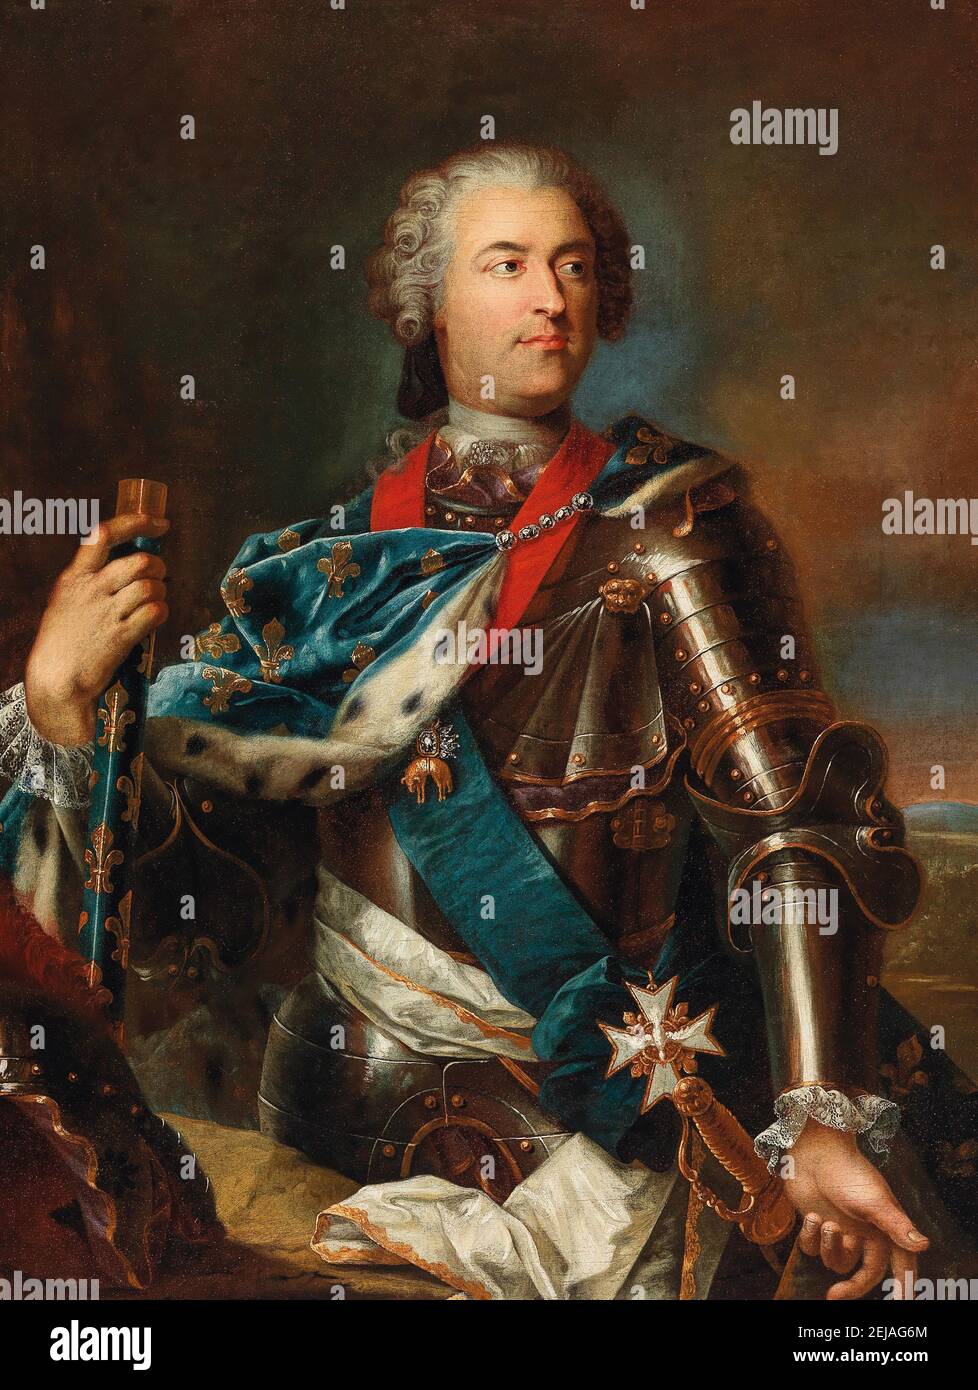 Portrait of the King Louis XV of France (1710-1774). Museum: PRIVATE COLLECTION. Author: Jean-Gaspard Heilmann. Stock Photo